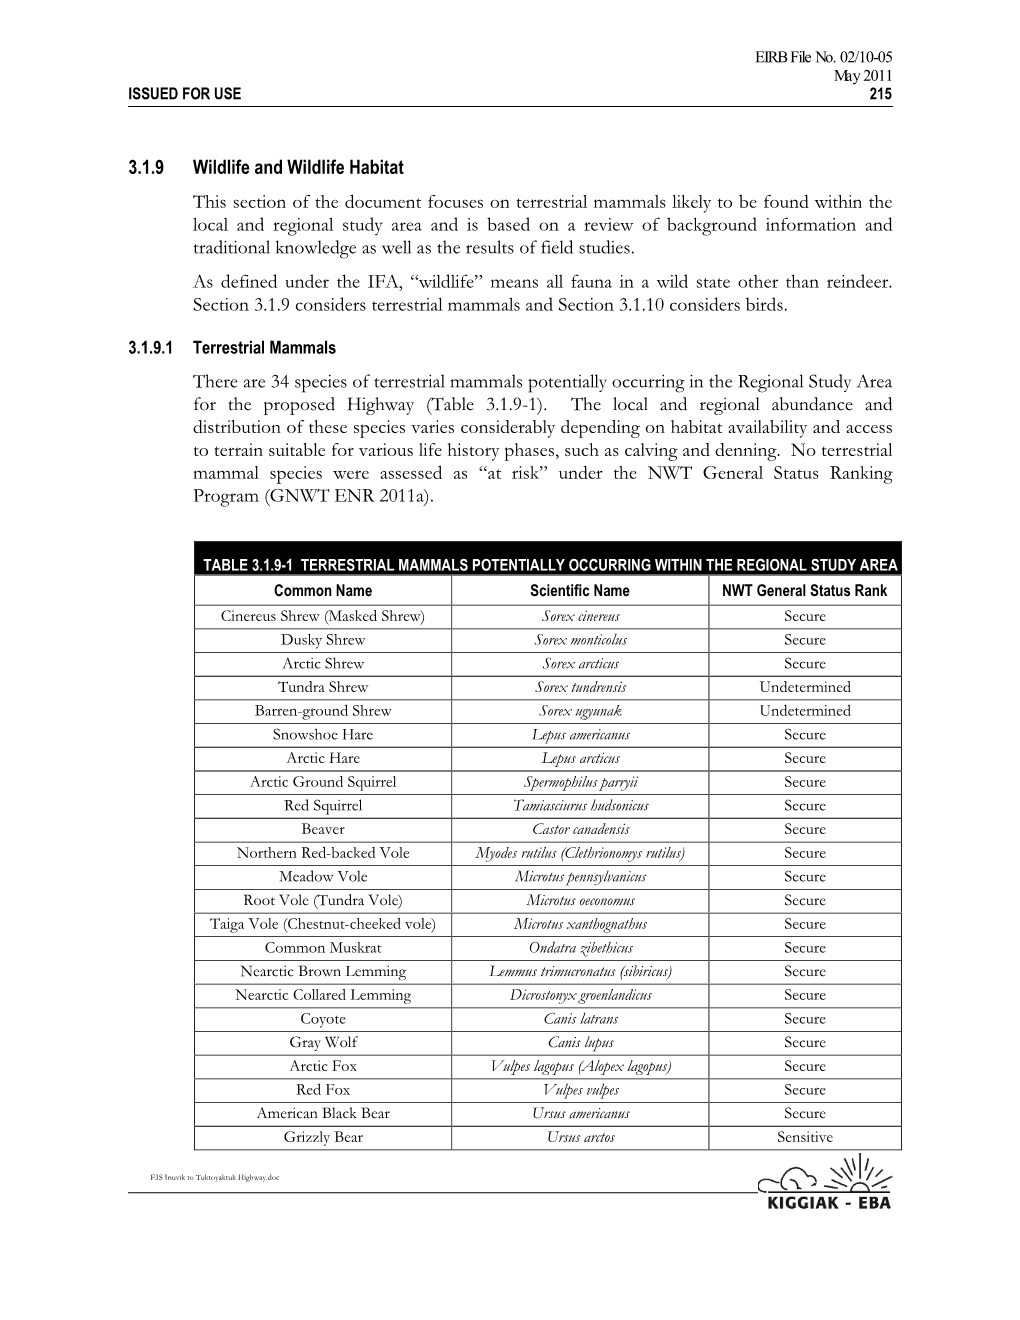 3.1.9 Wildlife and Wildlife Habitat This Section of the Document Focuses On